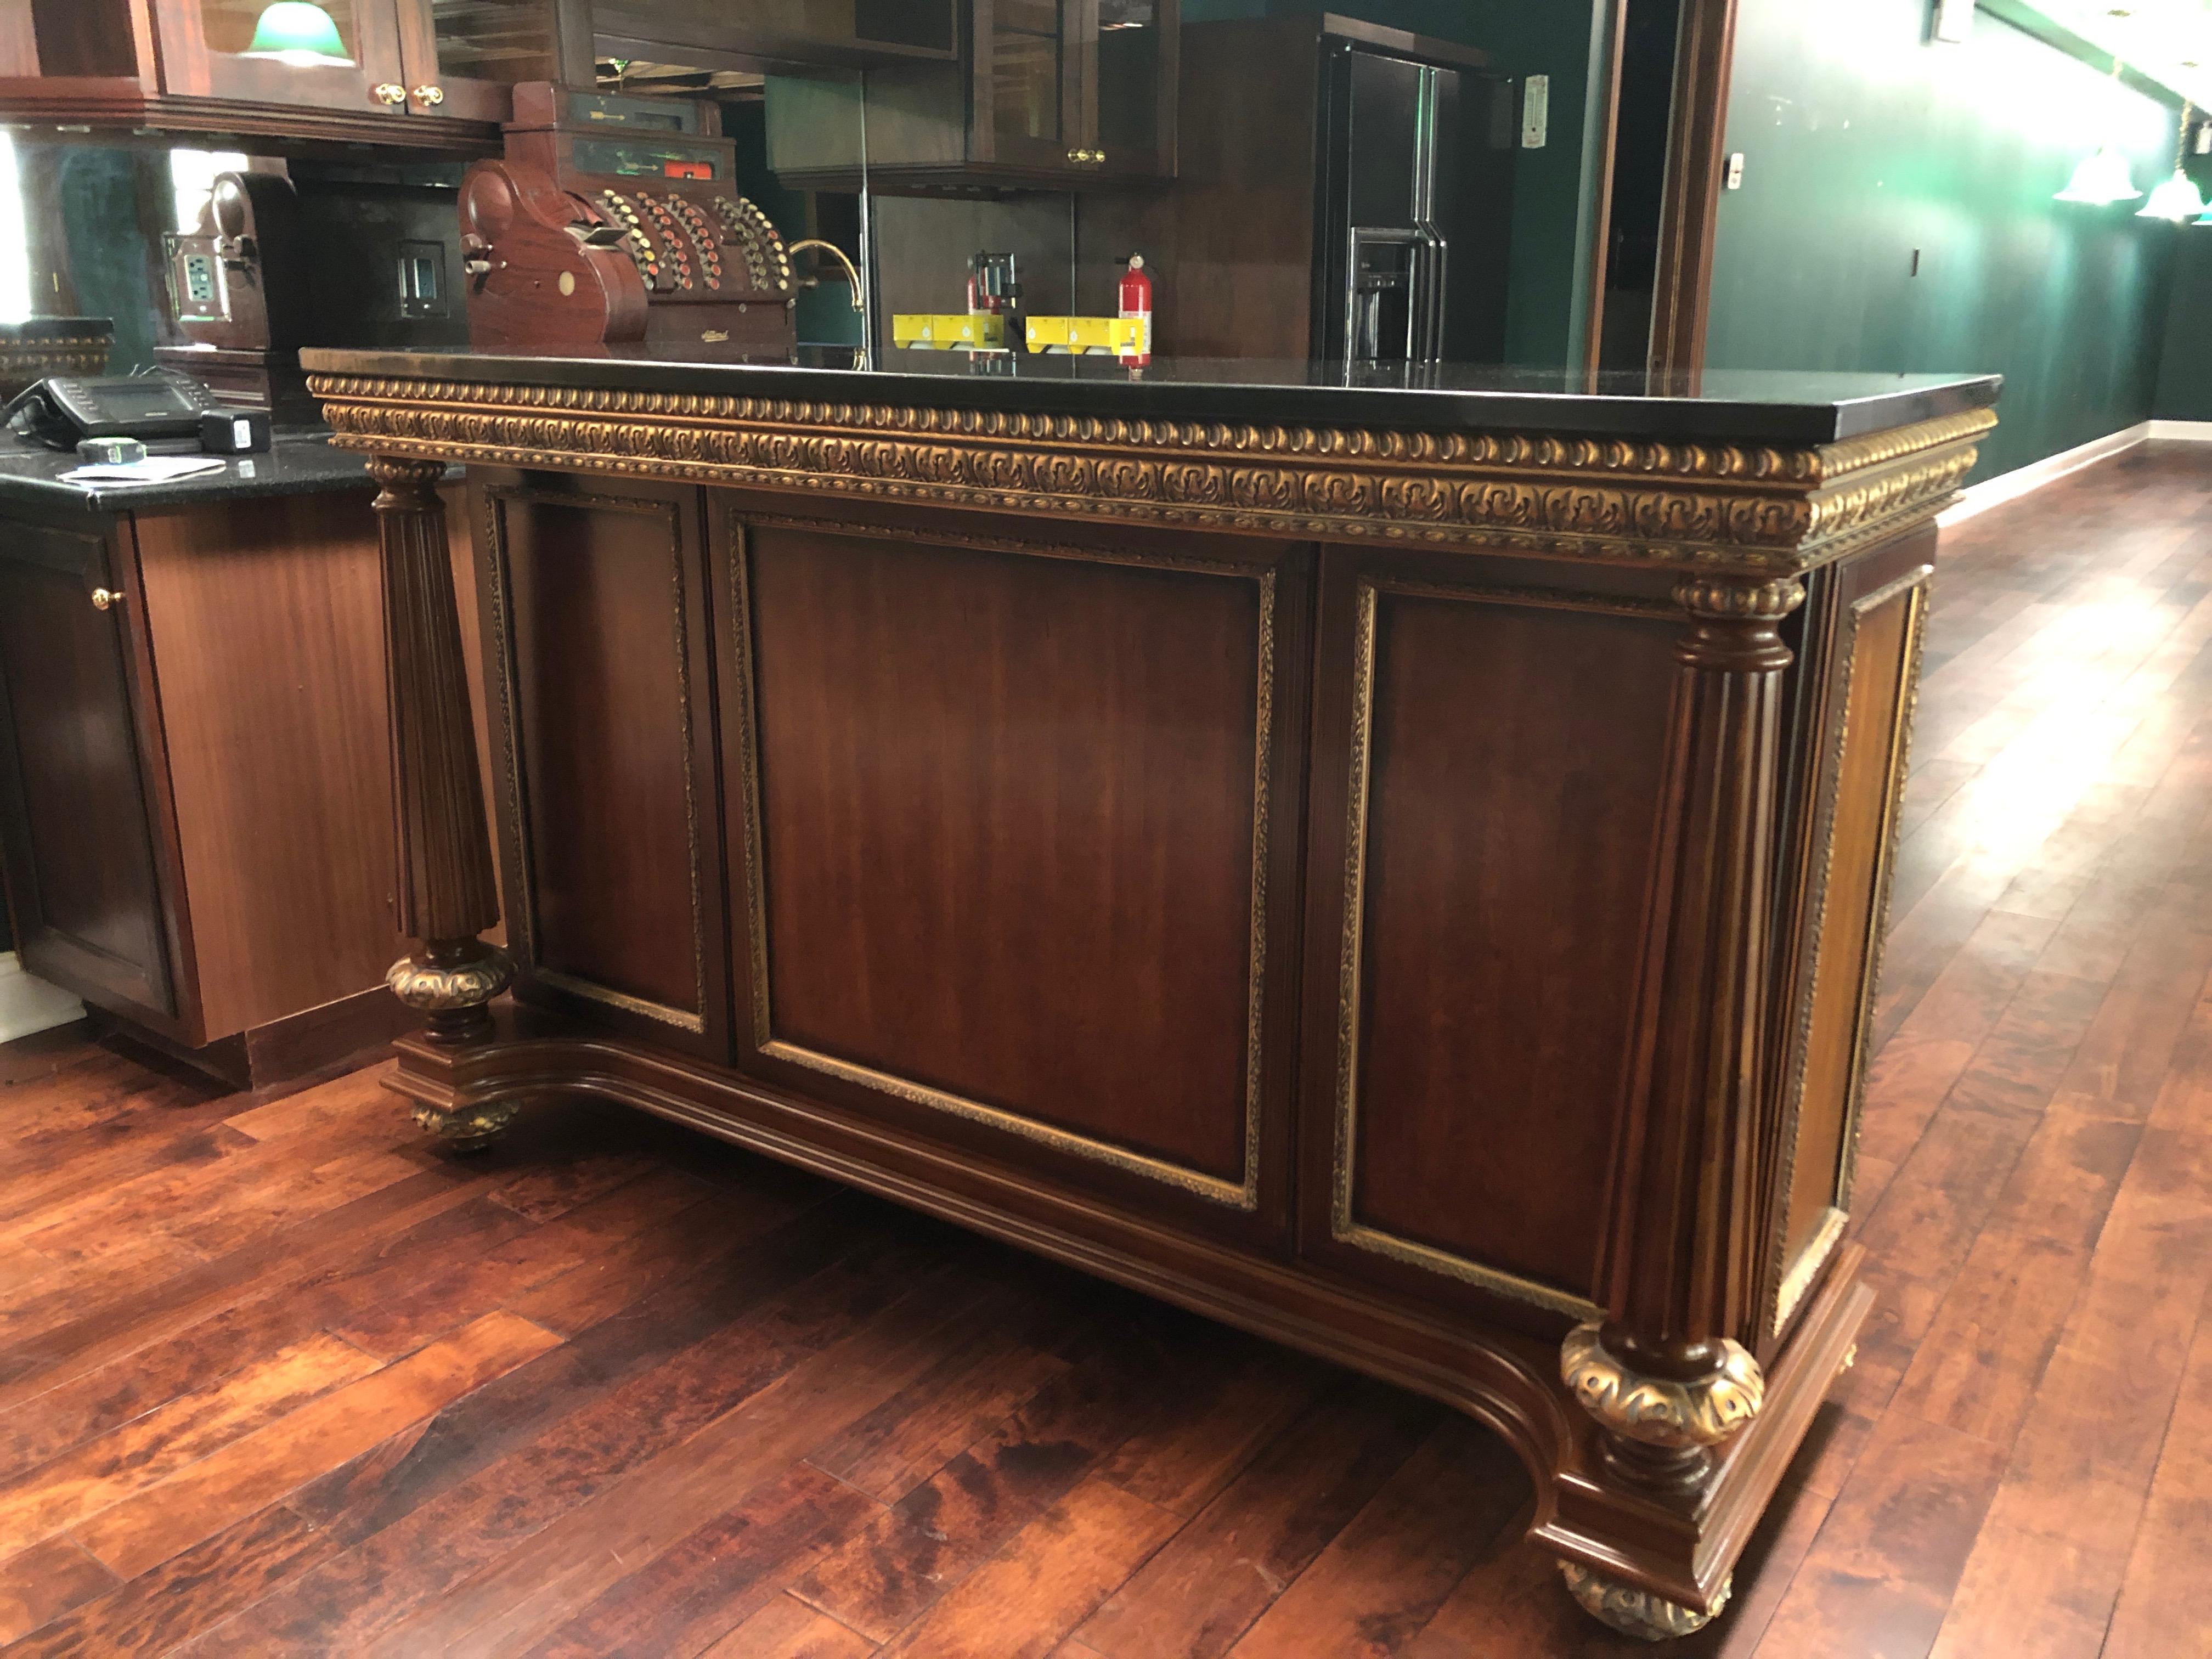 A sumptuous custom dry bar cabinet having rich cherry cabinetry, fluted columns on the front and ornate gilded carved wood decorations. The top is a handsome black and white grained granite. The back of the bar has a wine rack, 3 drawers, a pull out